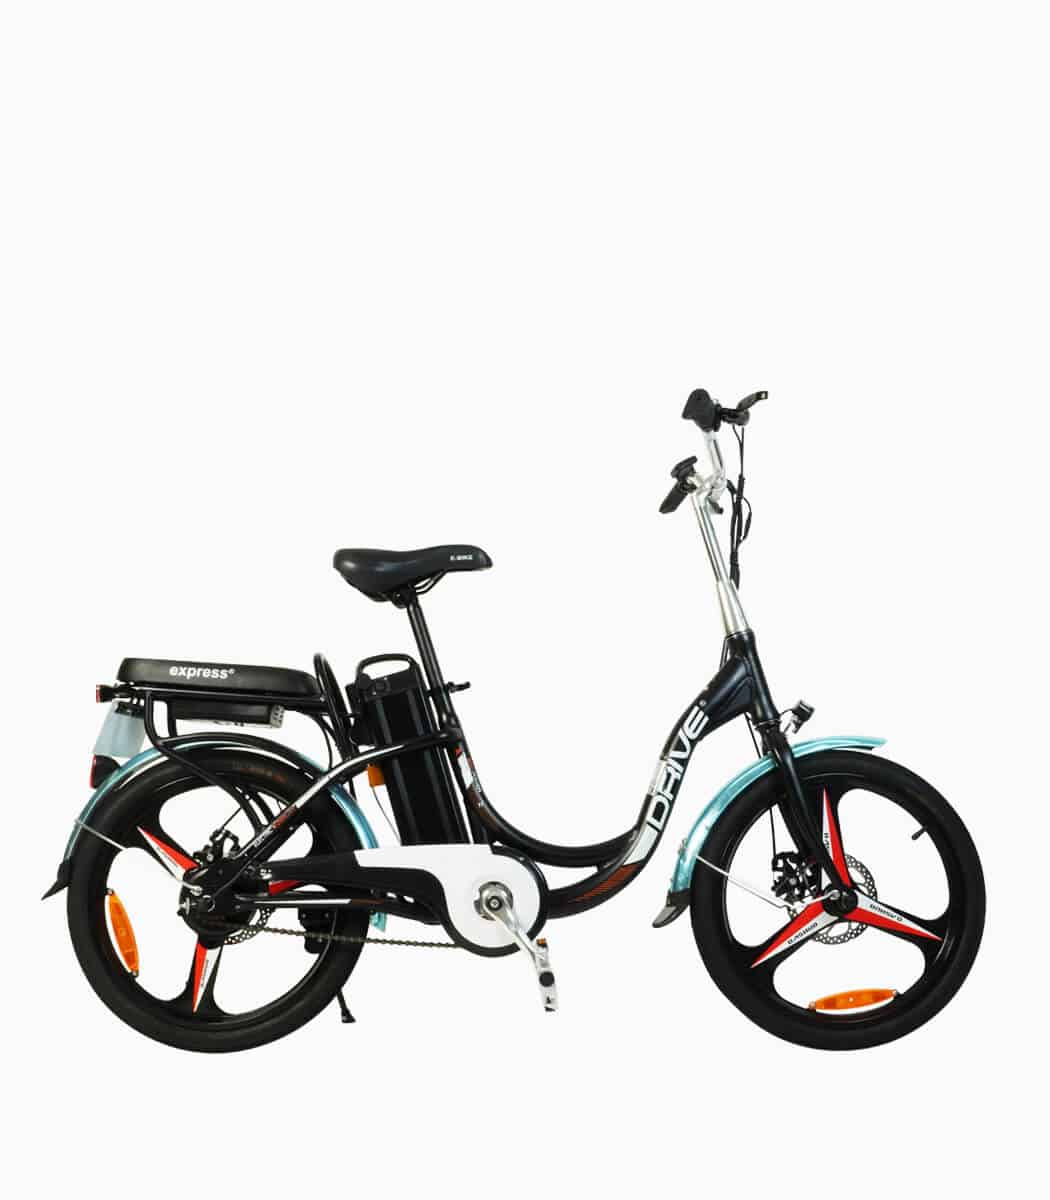 ECO DRIVE (BLACK10AH) LTA approved ebike right